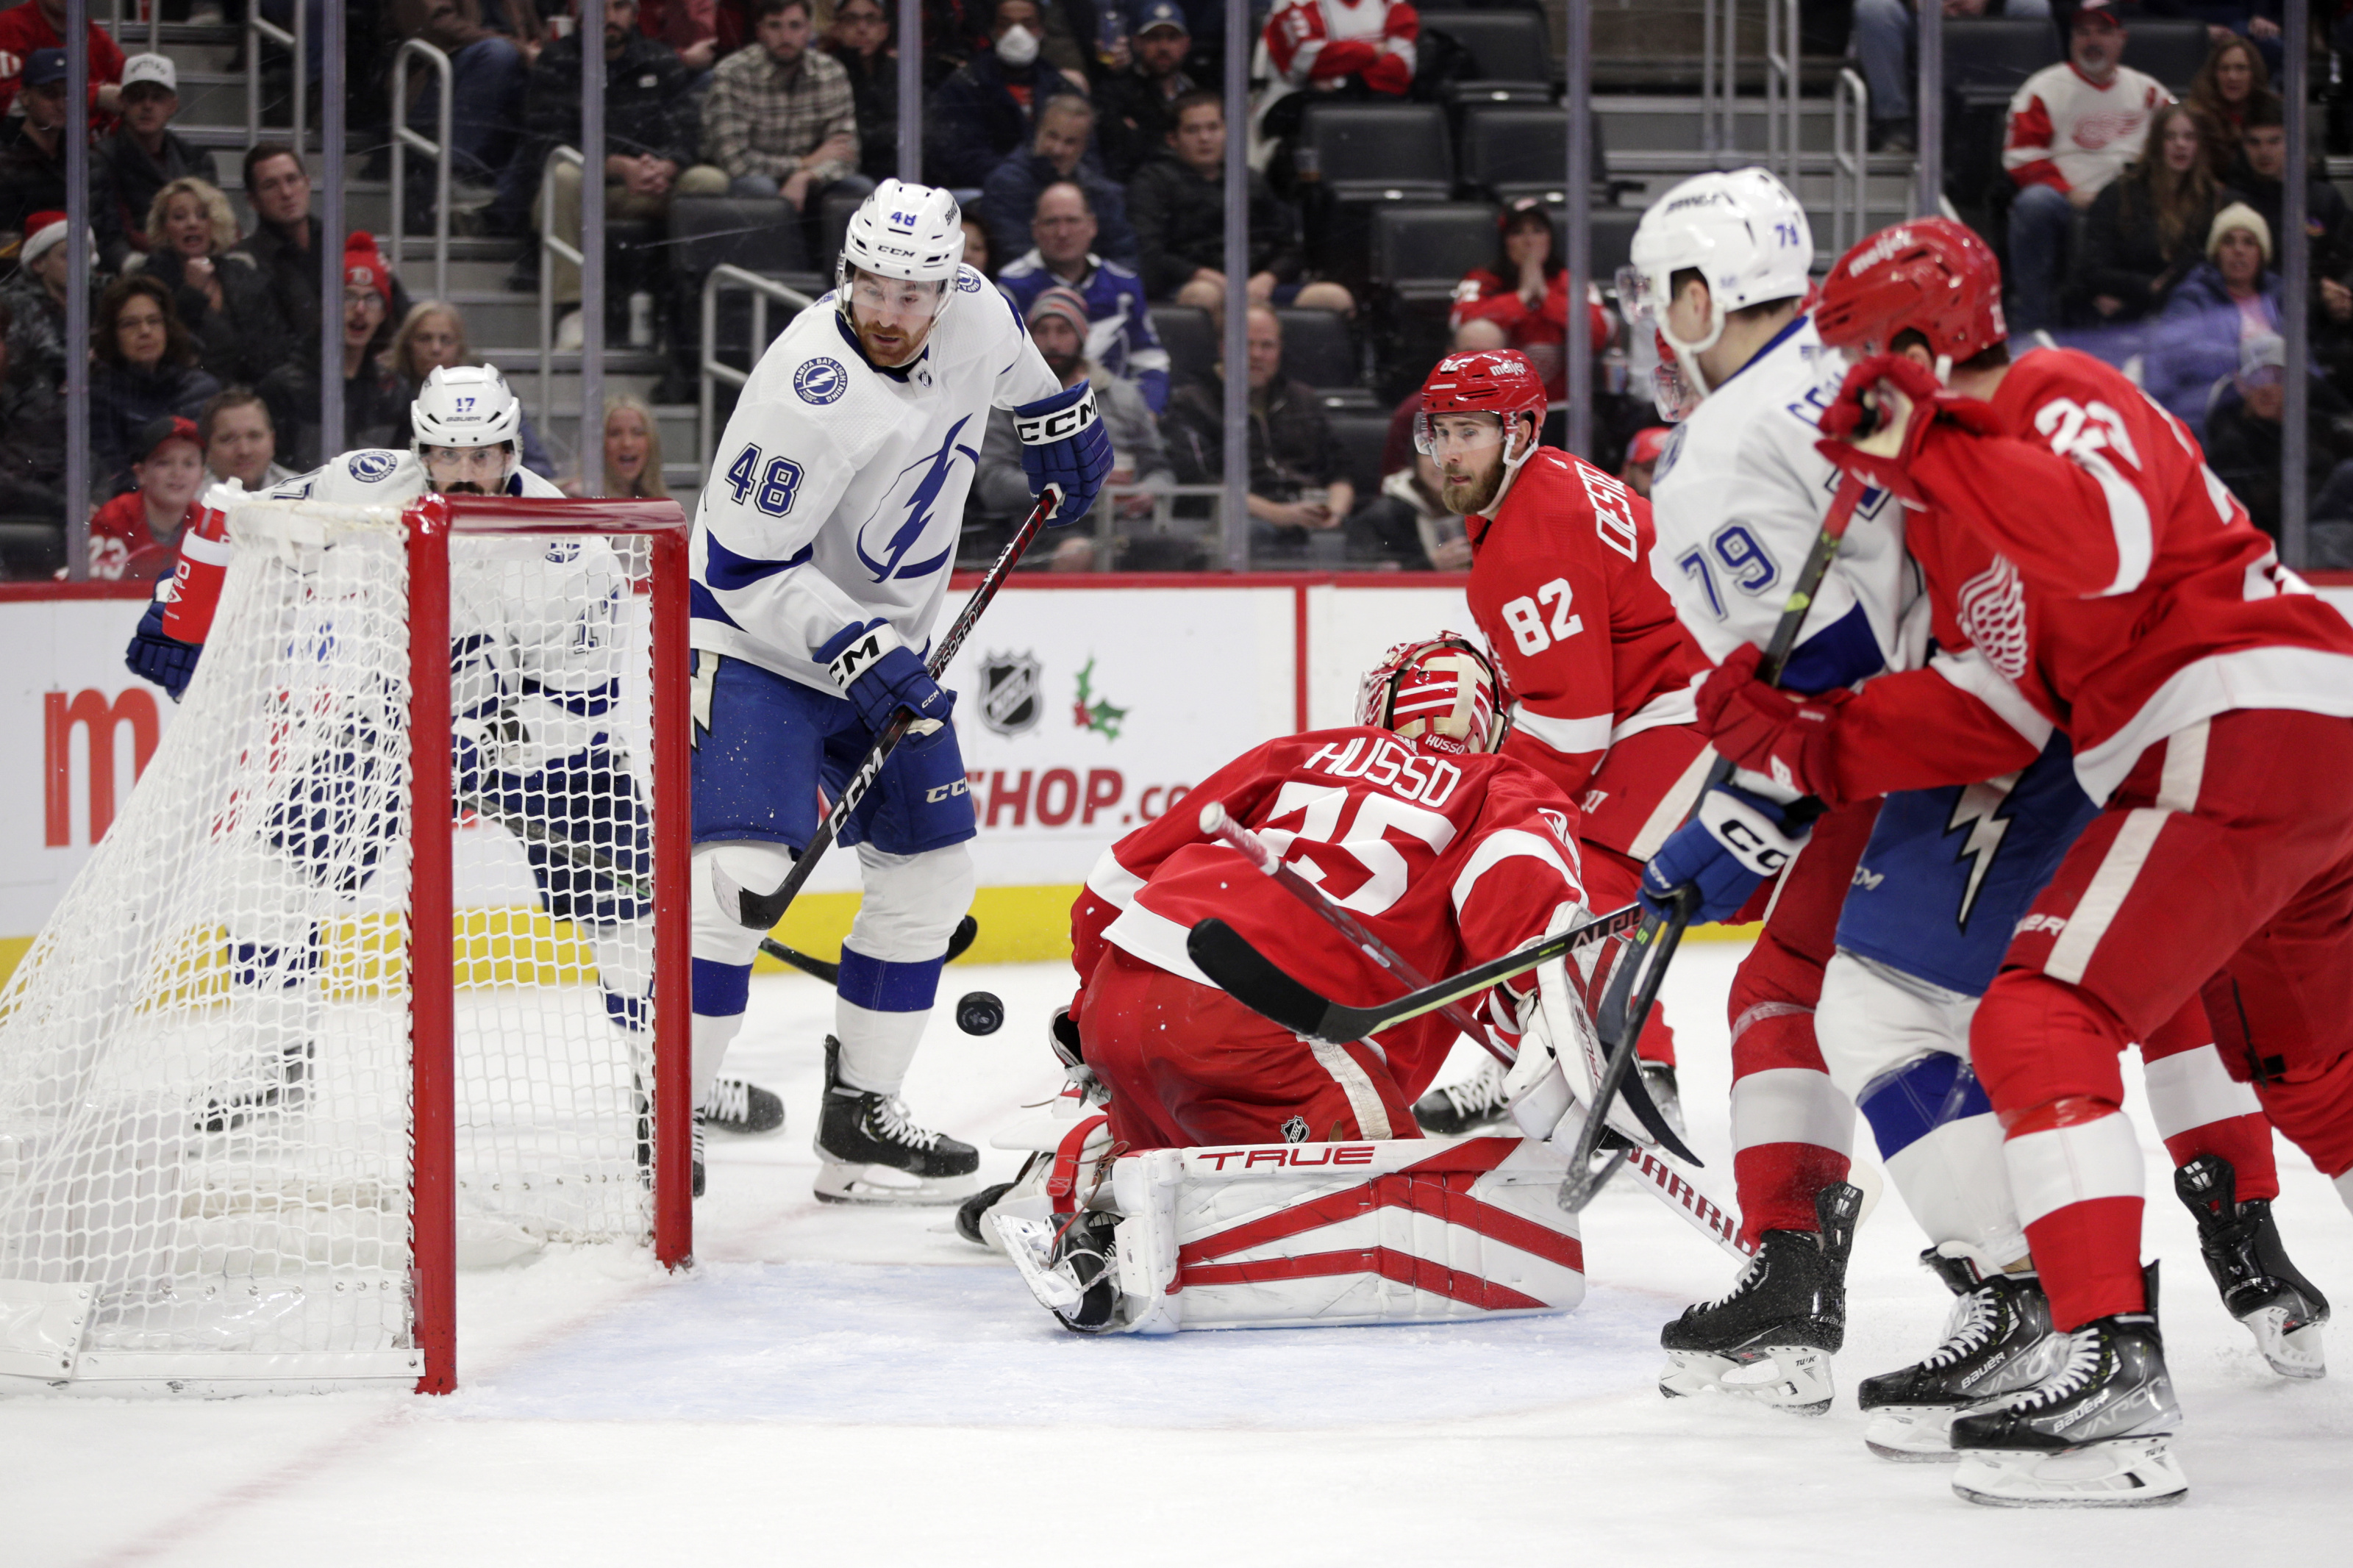 Lightning bring 4-game losing streak into matchup with the Red Wings